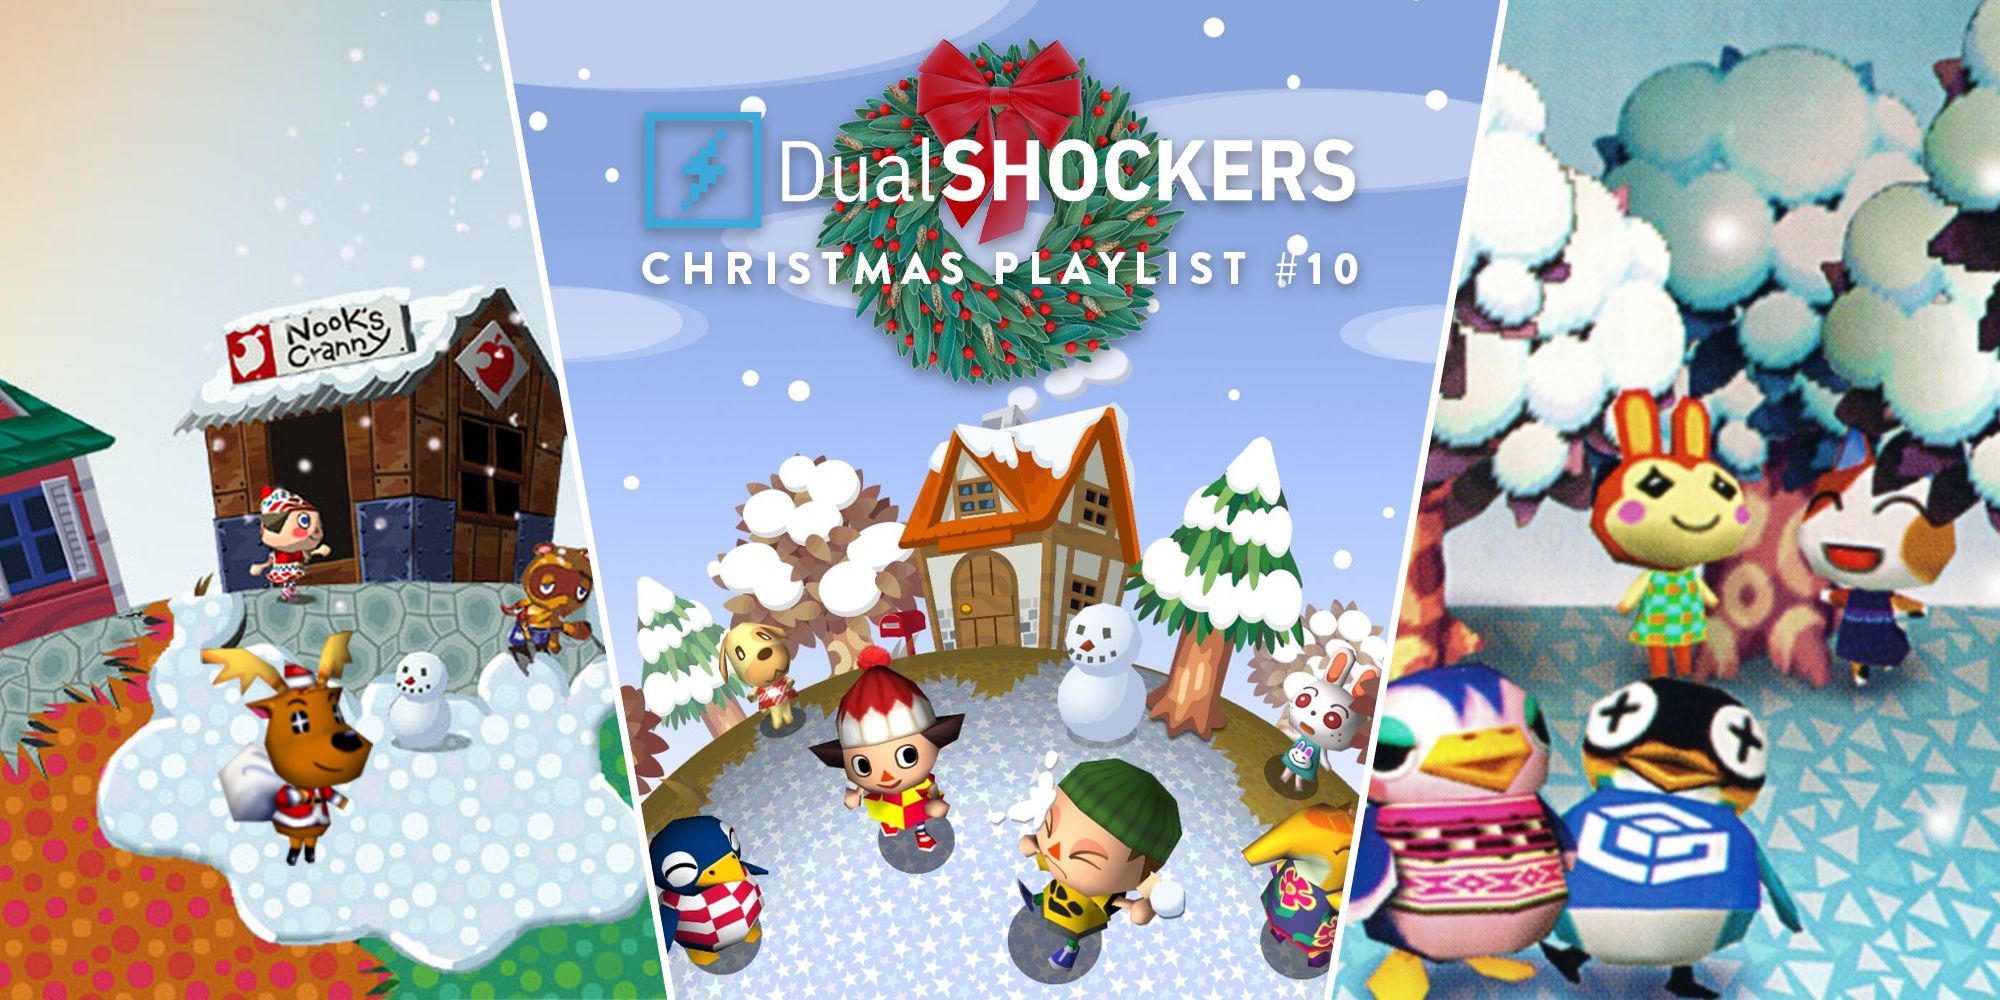 Animal Crossing Nook's Cranny with Tom Nook and Jingle, winter in Animal Crossing with villagers, bunny, cat, and penguin villagers